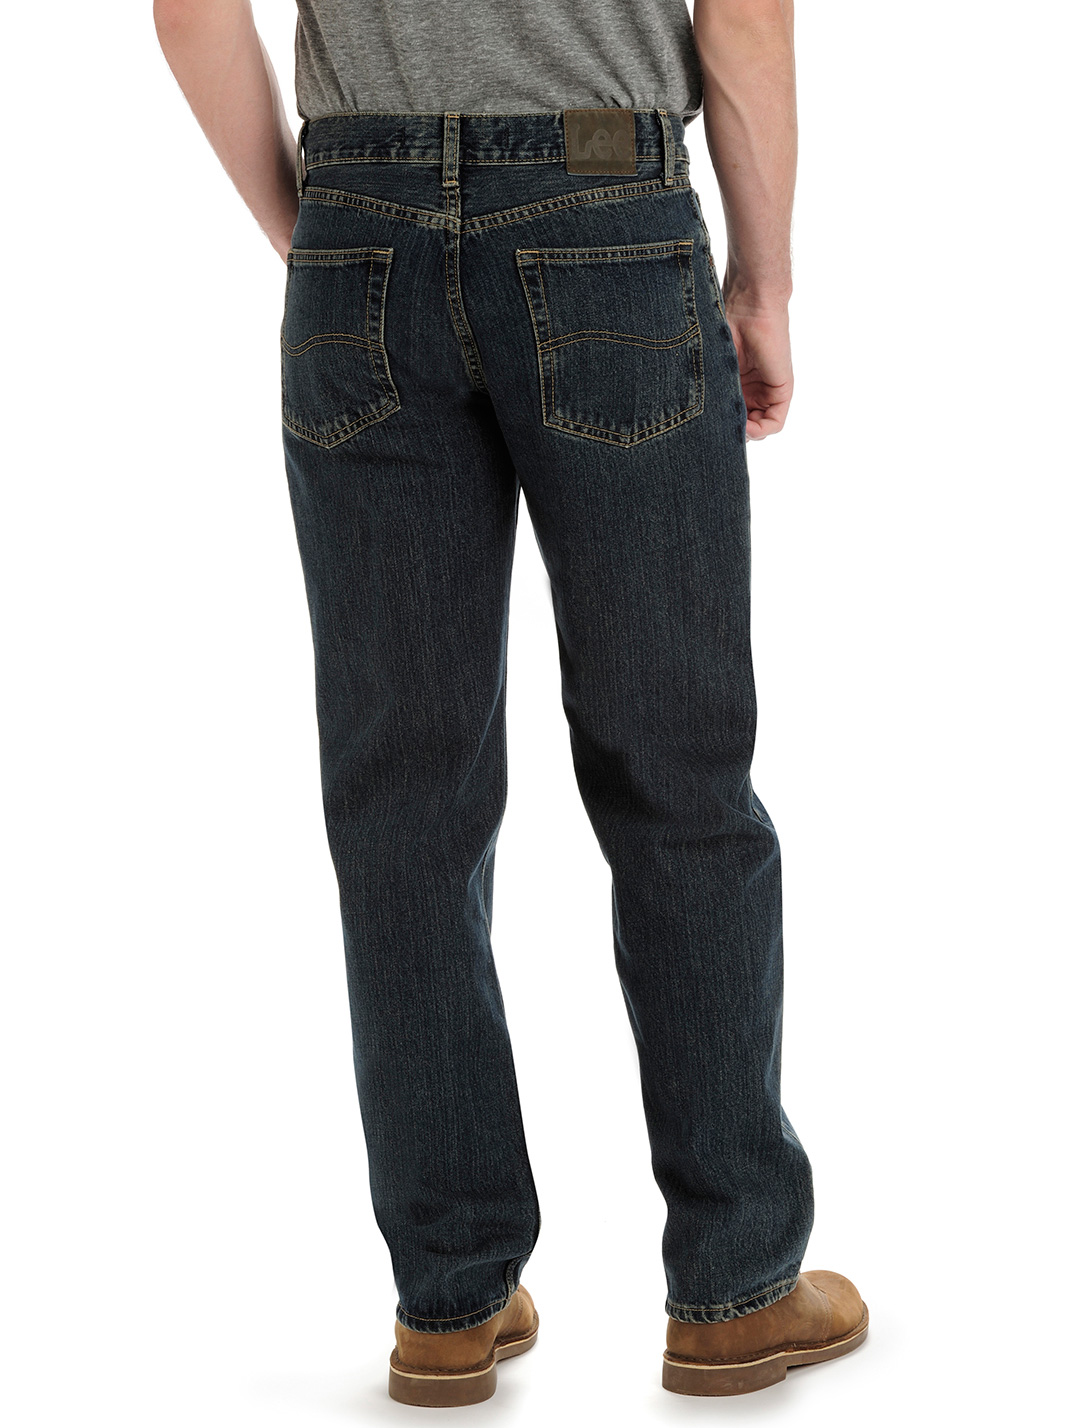 Lee Men's Relaxed Fit Straight Leg Jeans - Tomas, Tomas, 40X36 - image 2 of 3